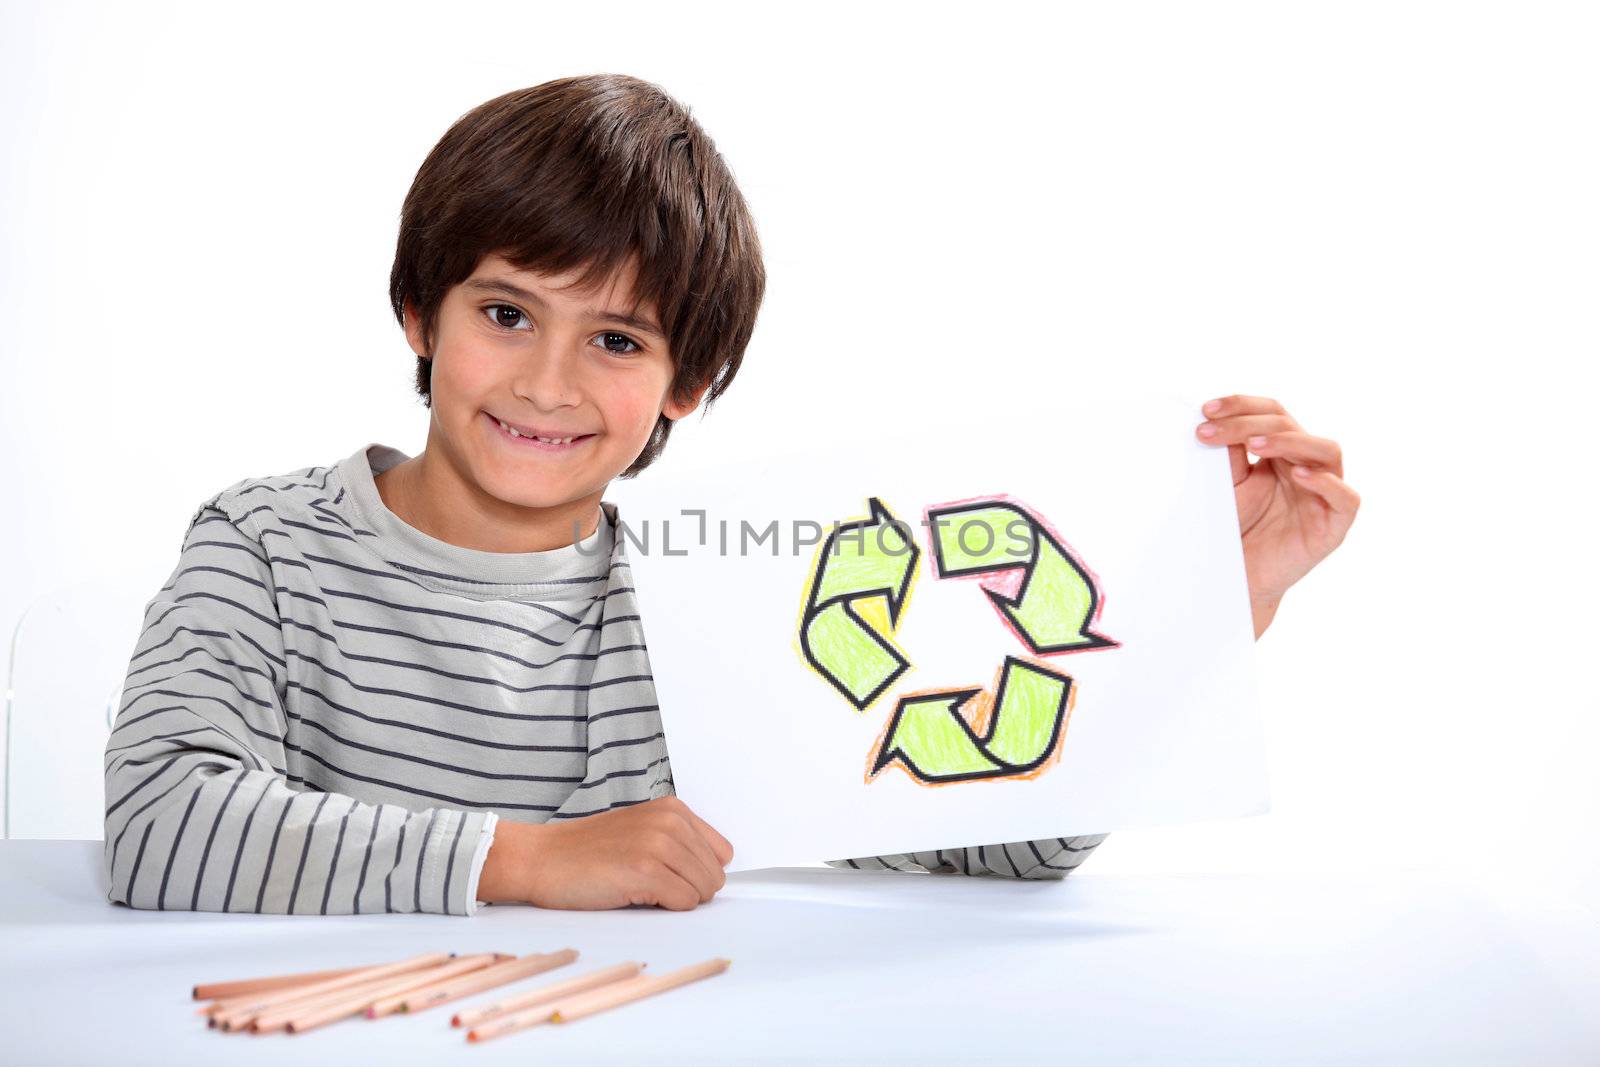 Child drawing recycling symbol by phovoir